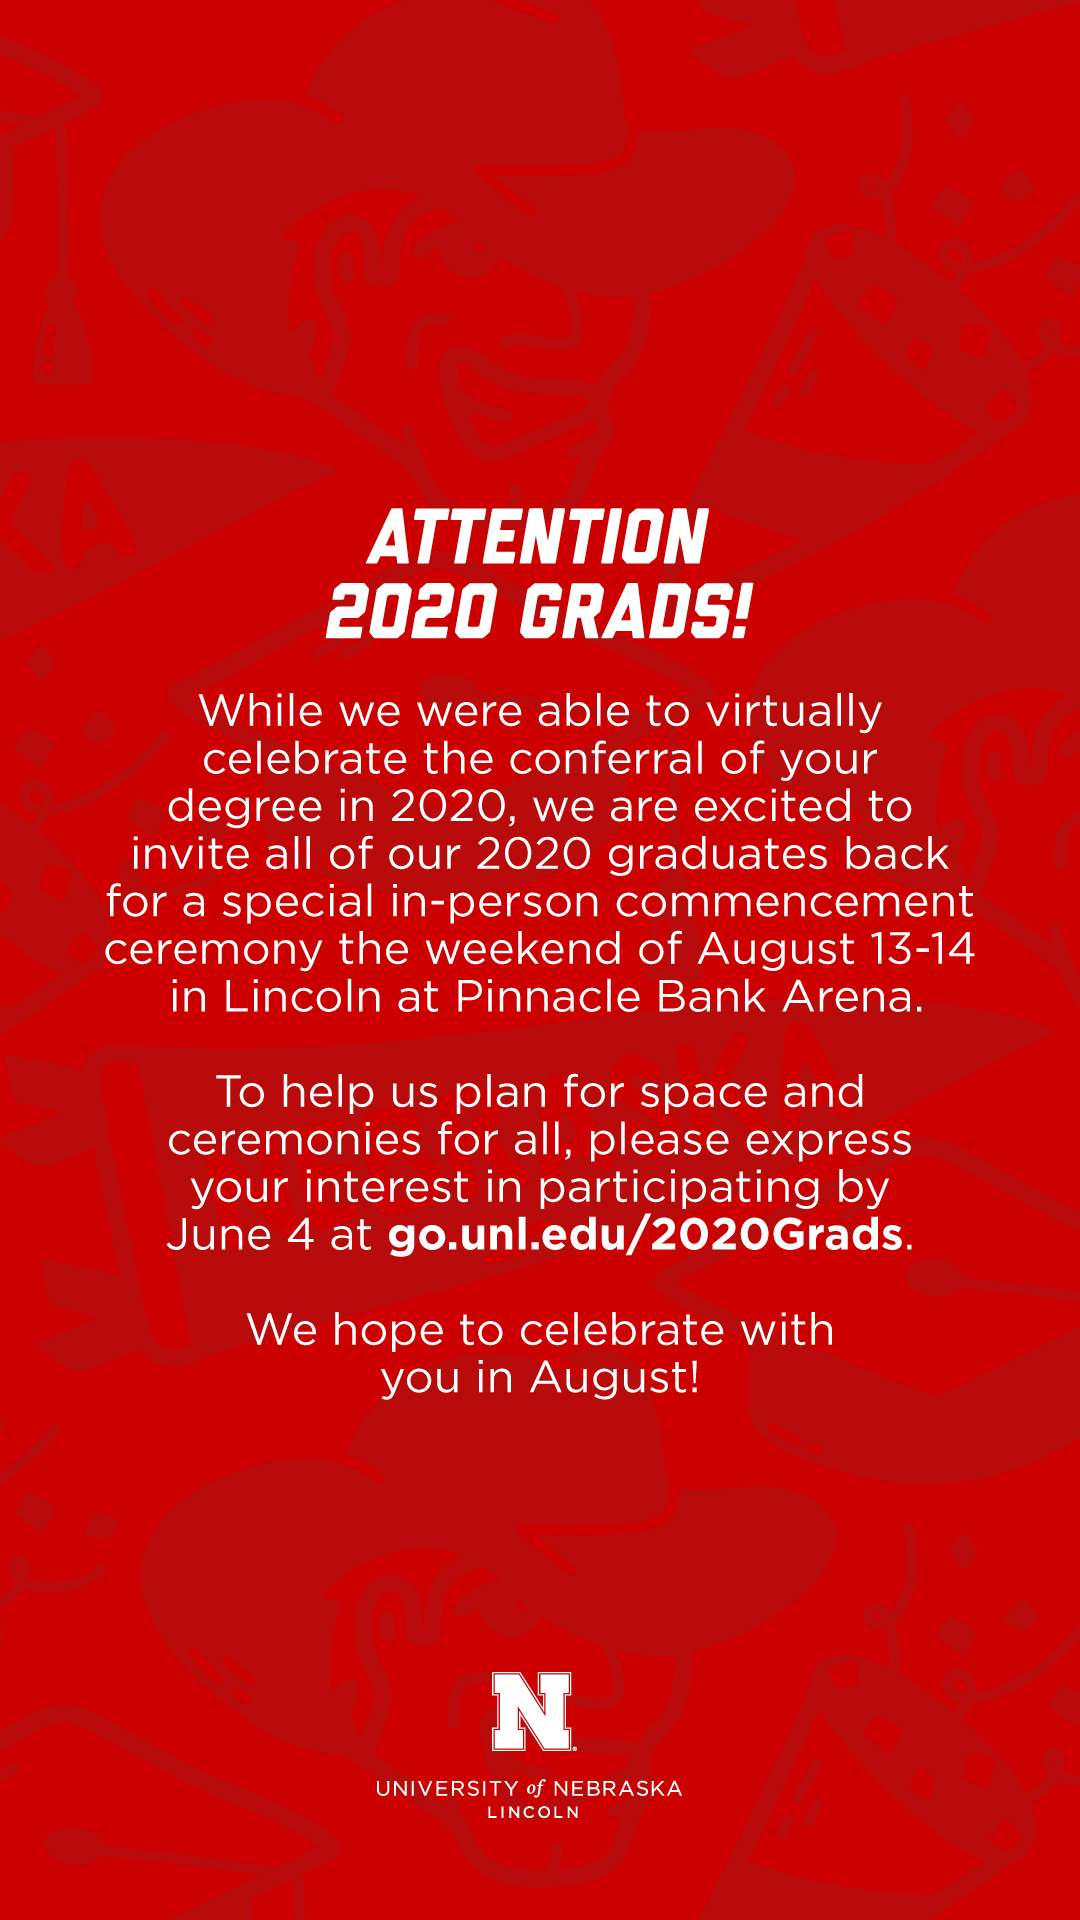 This is 2020 grads' chance to experience all the pomp and circumstance of an in-person Nebraska commencement ceremony surrounded by their fellow graduates and family — and to cross the stage.